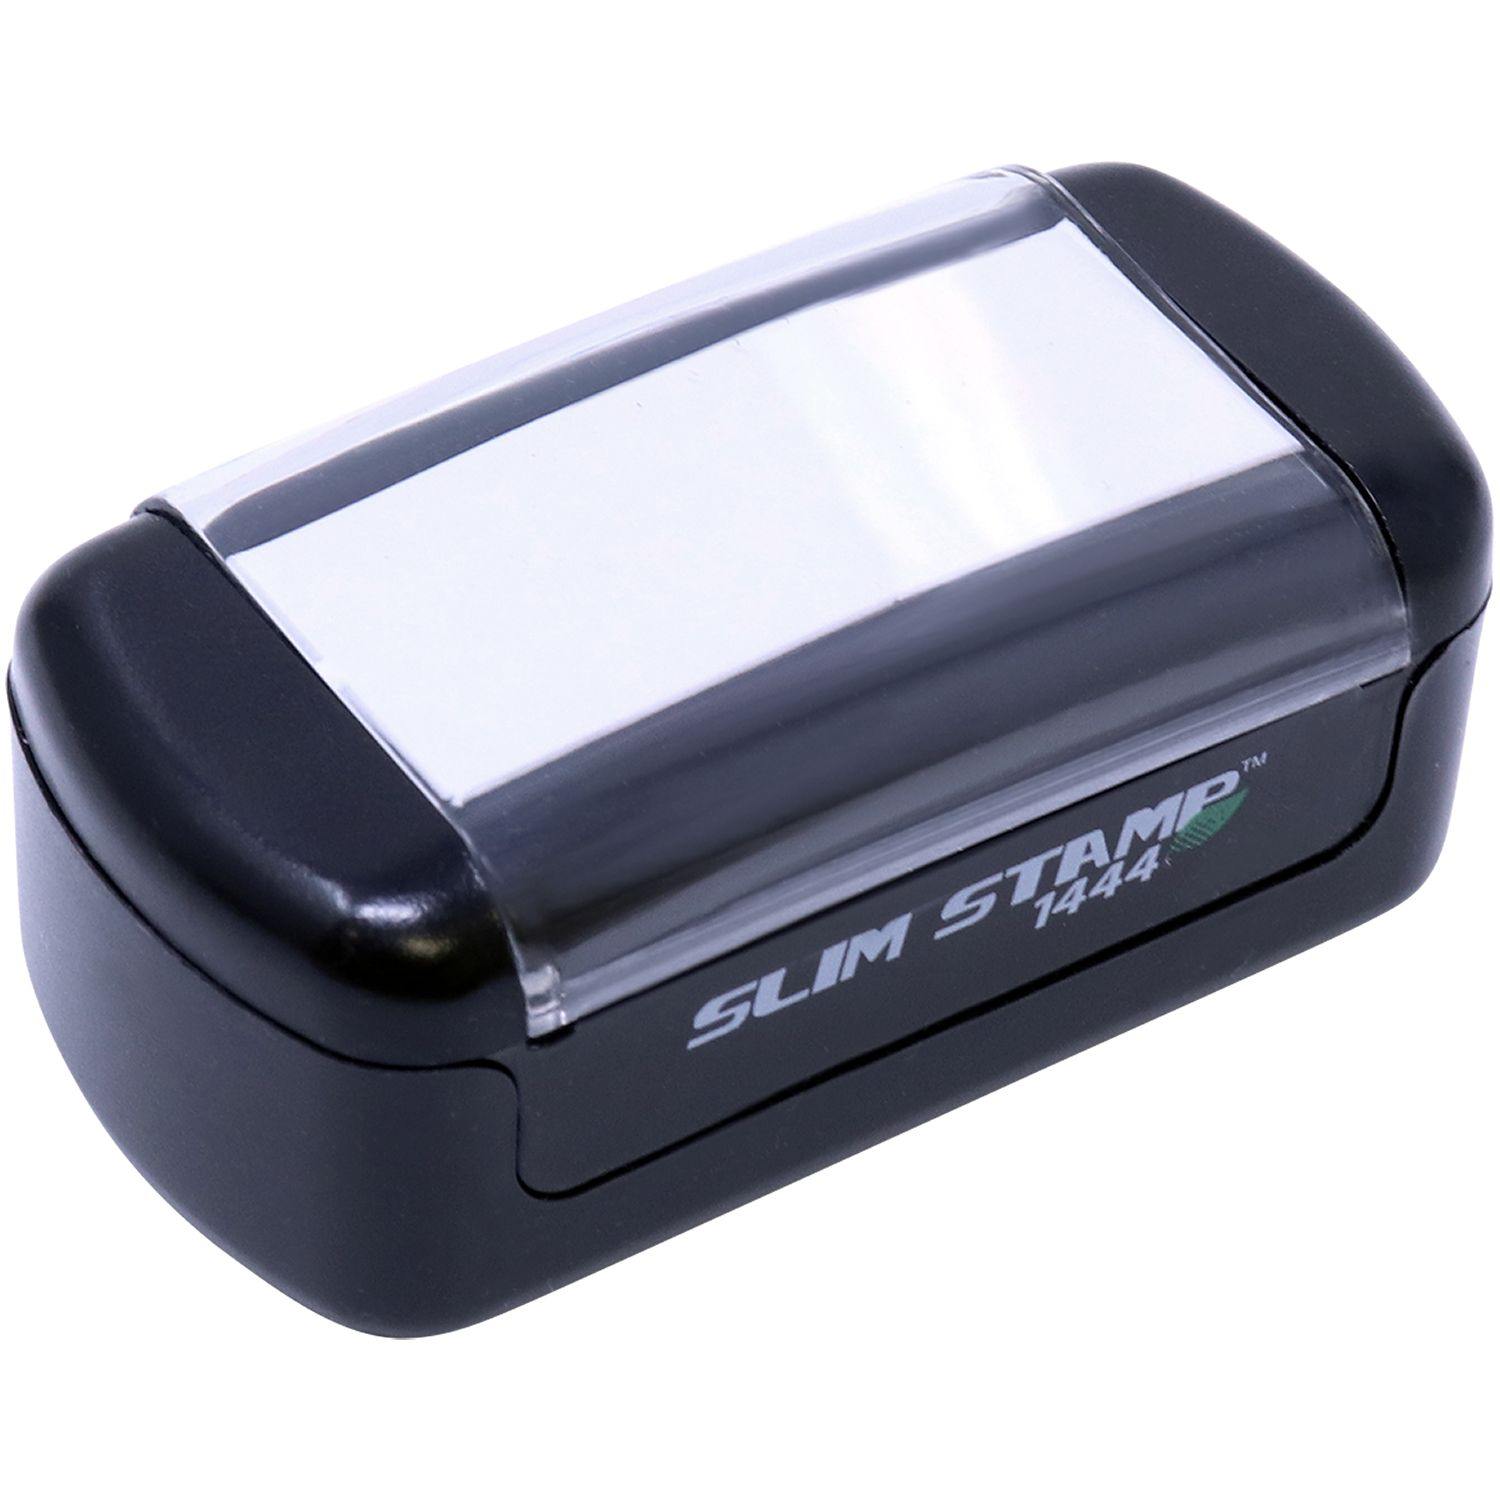 Top Down View of Slim Pre-Inked Please Review with your child Stamp